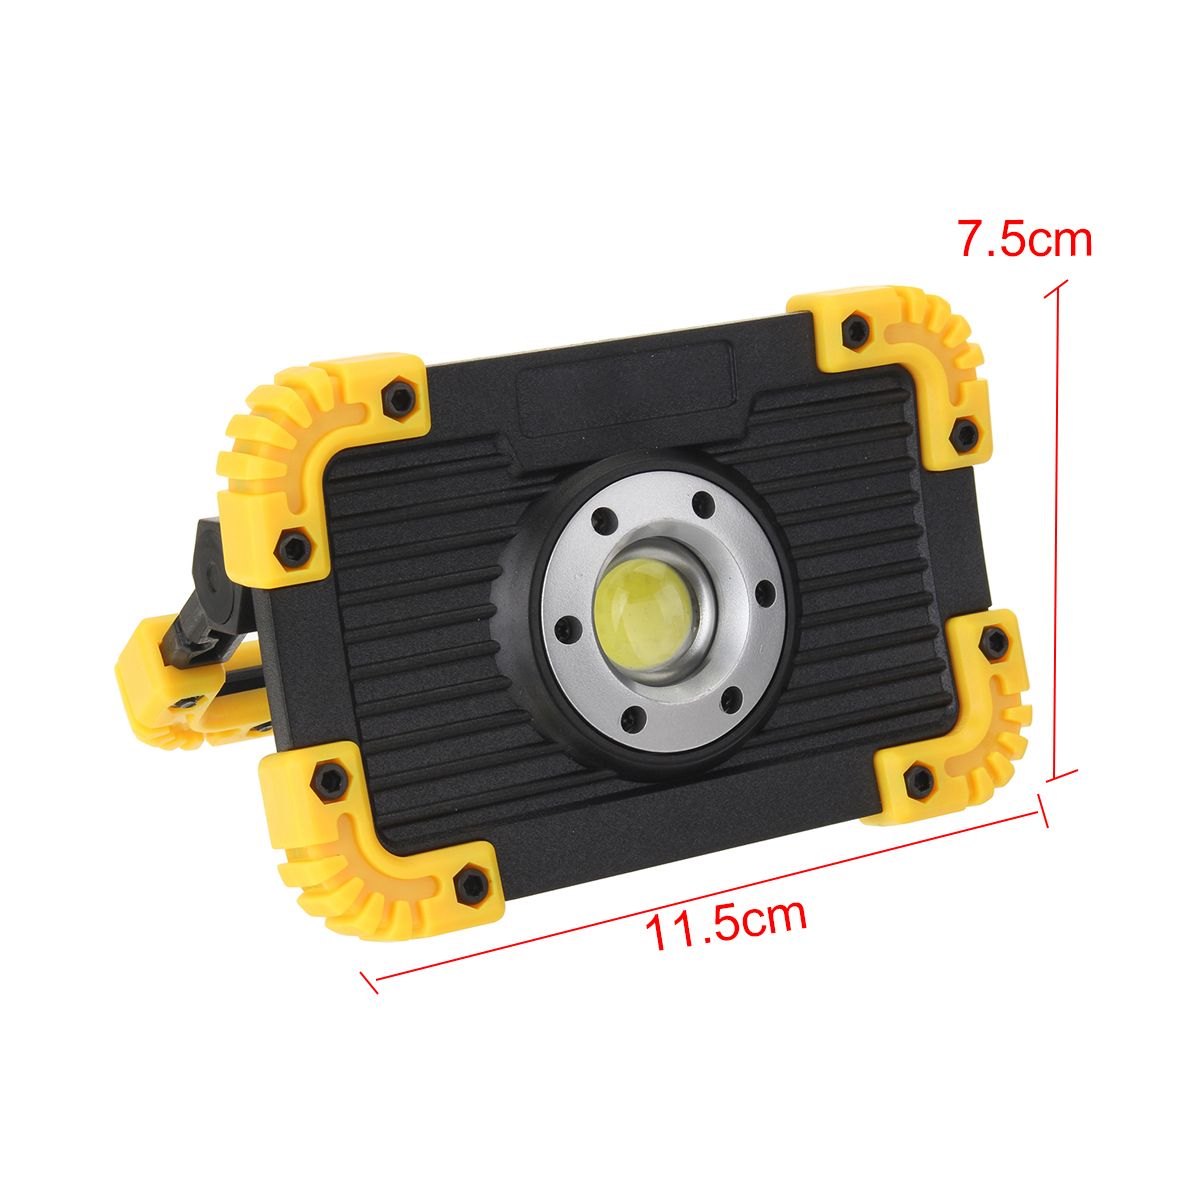 Rechargeable-COB-LED-Flood-Work-Light-Waterproof-for-Outdoor-Camping-Hiking-Emergency-Car-Repairing--1649977